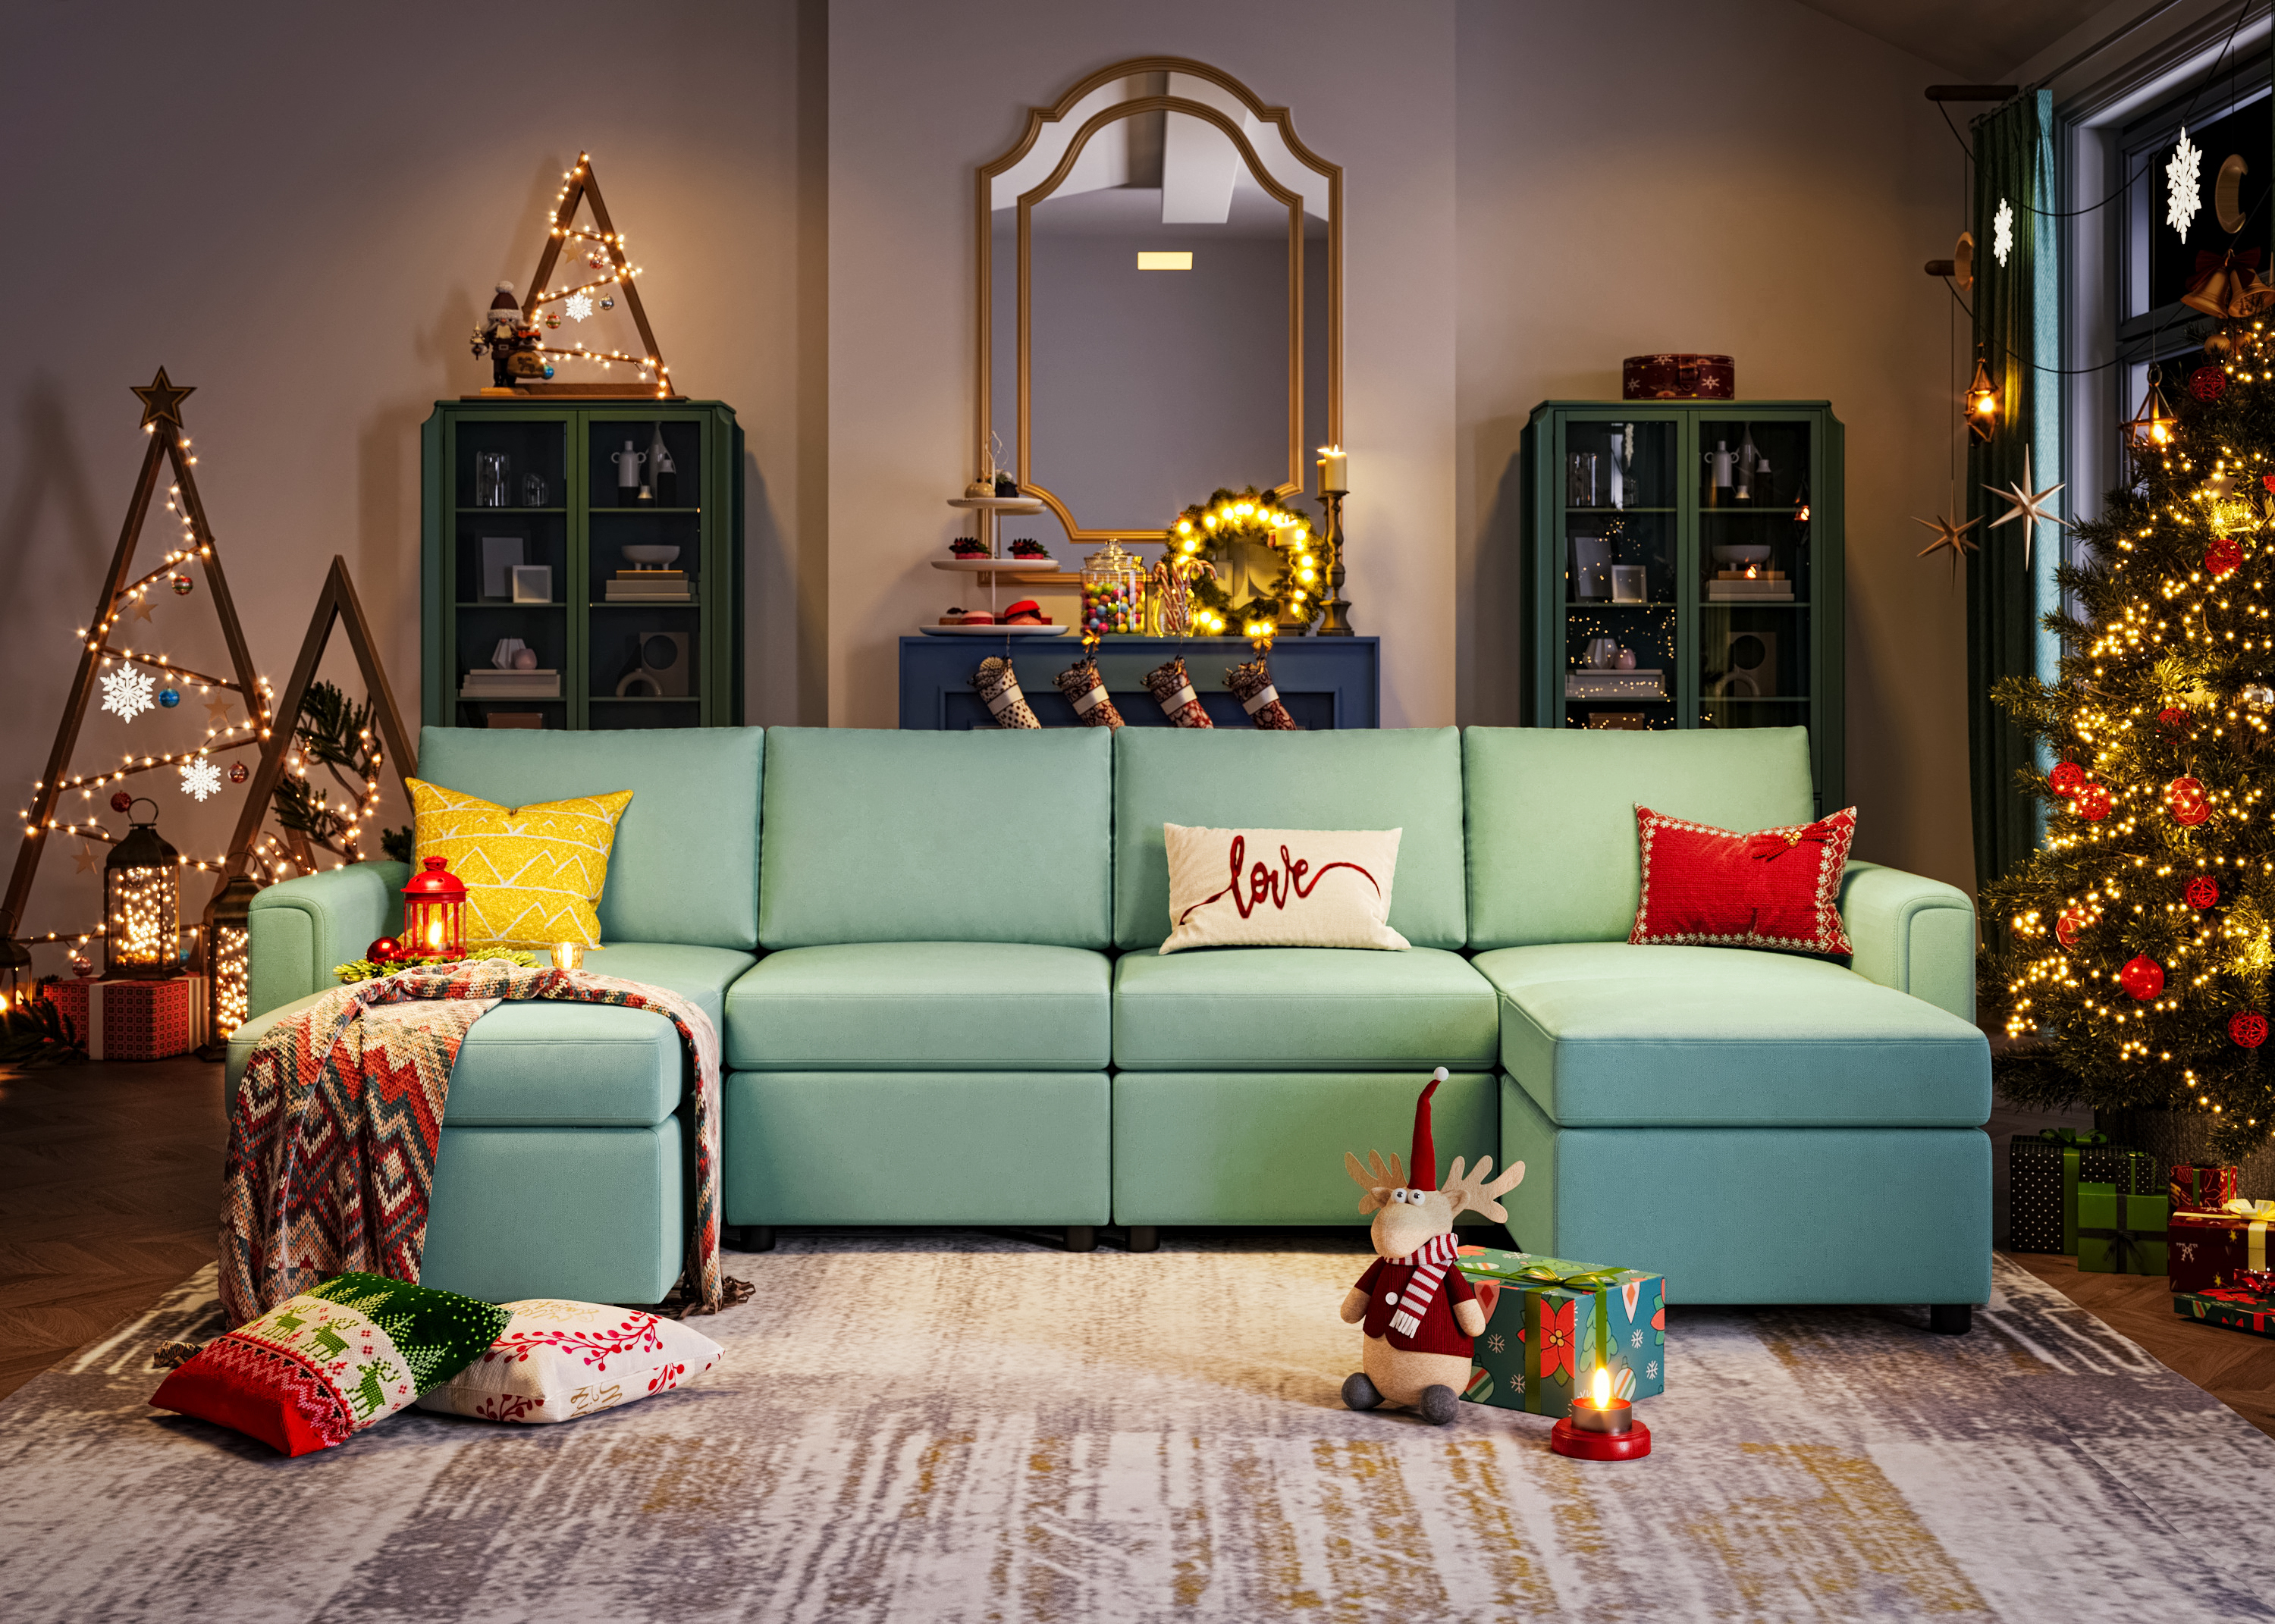 LINSY HOME Modular Couches and Sofas Sectional with Storage Sectional Sofa U Shaped Sectional Couch with Reversible Chaises, Teal - image 3 of 14